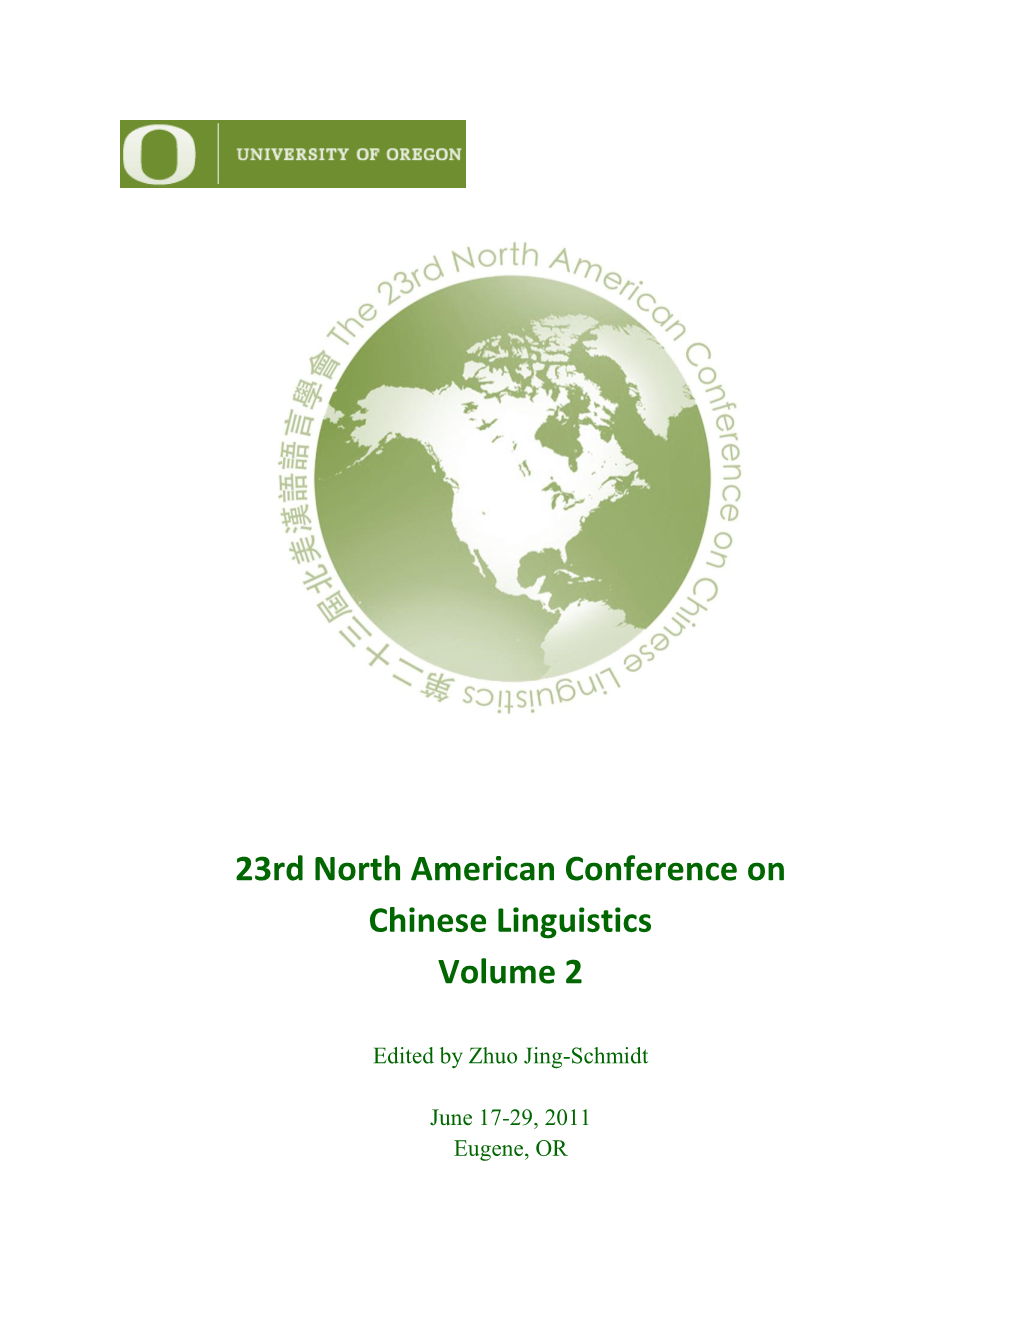 23Rd North American Conference on Chinese Linguistics Volume 2